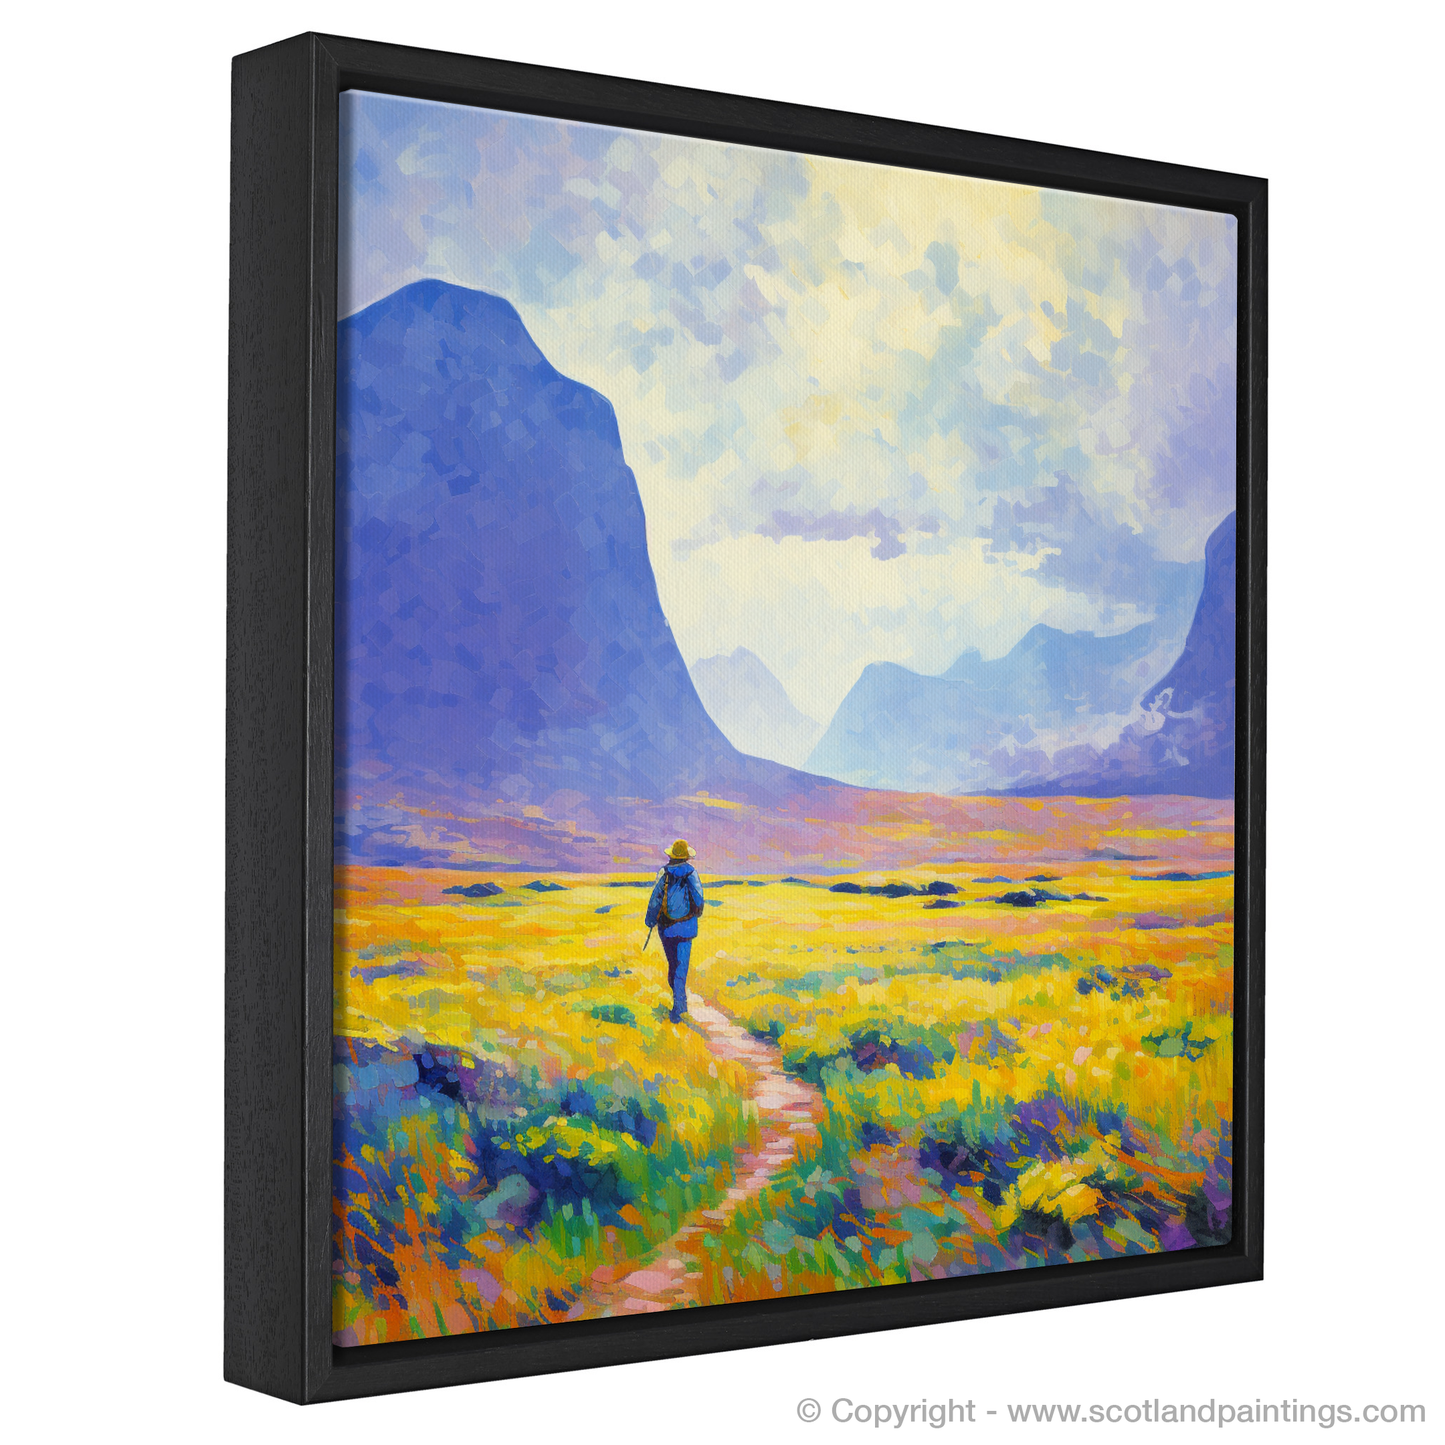 Painting and Art Print of Lone hiker in Glencoe during summer entitled "Highland Solitude: A Summer's Day in Glencoe".